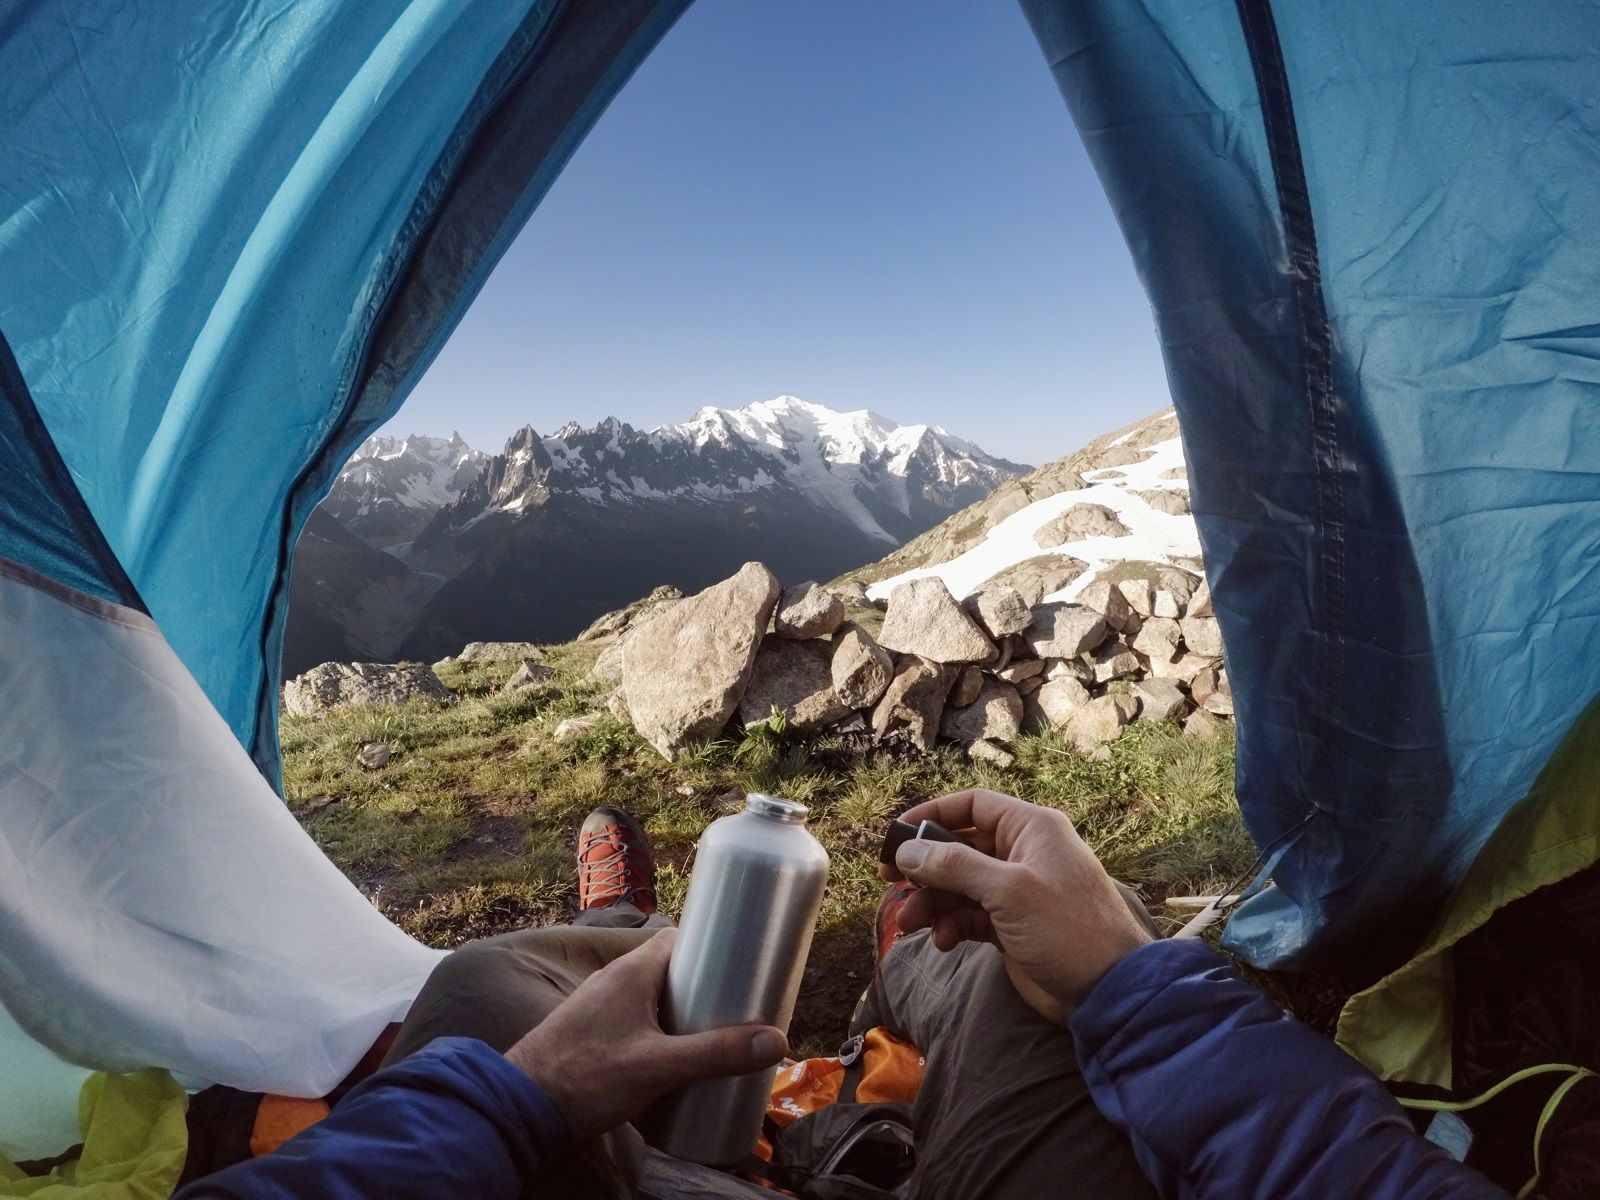 The Best Gopro Photos In The World Prepare To Lose Your Breath image 9